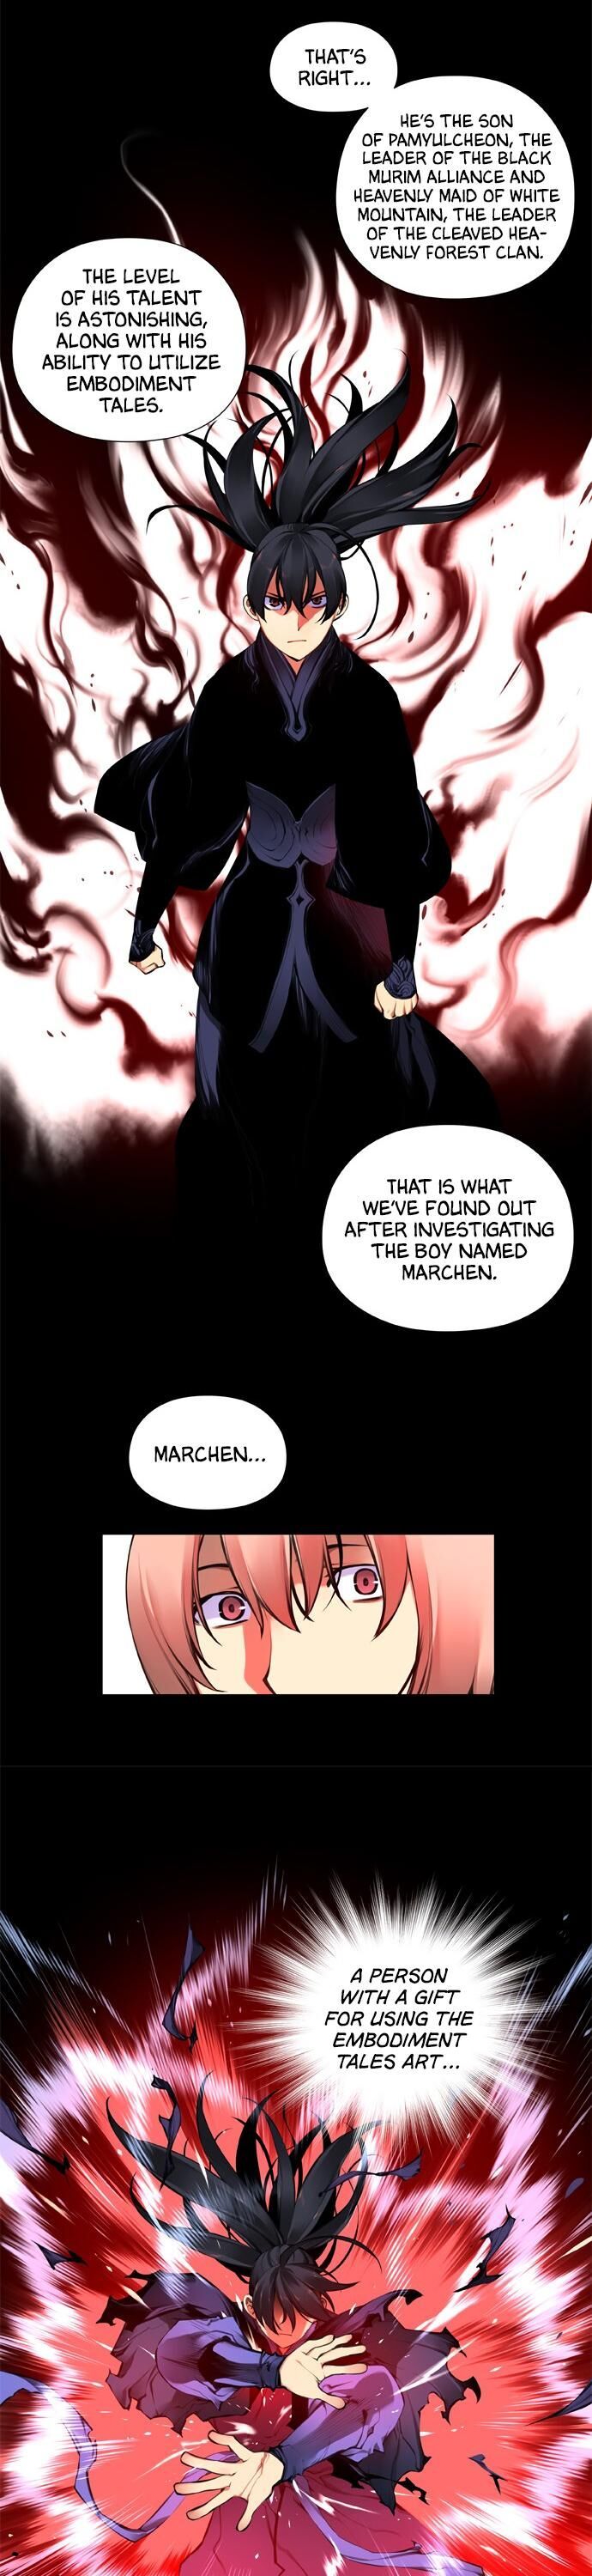 Marchen - The Embodiment of Tales Chapter 111 page 8